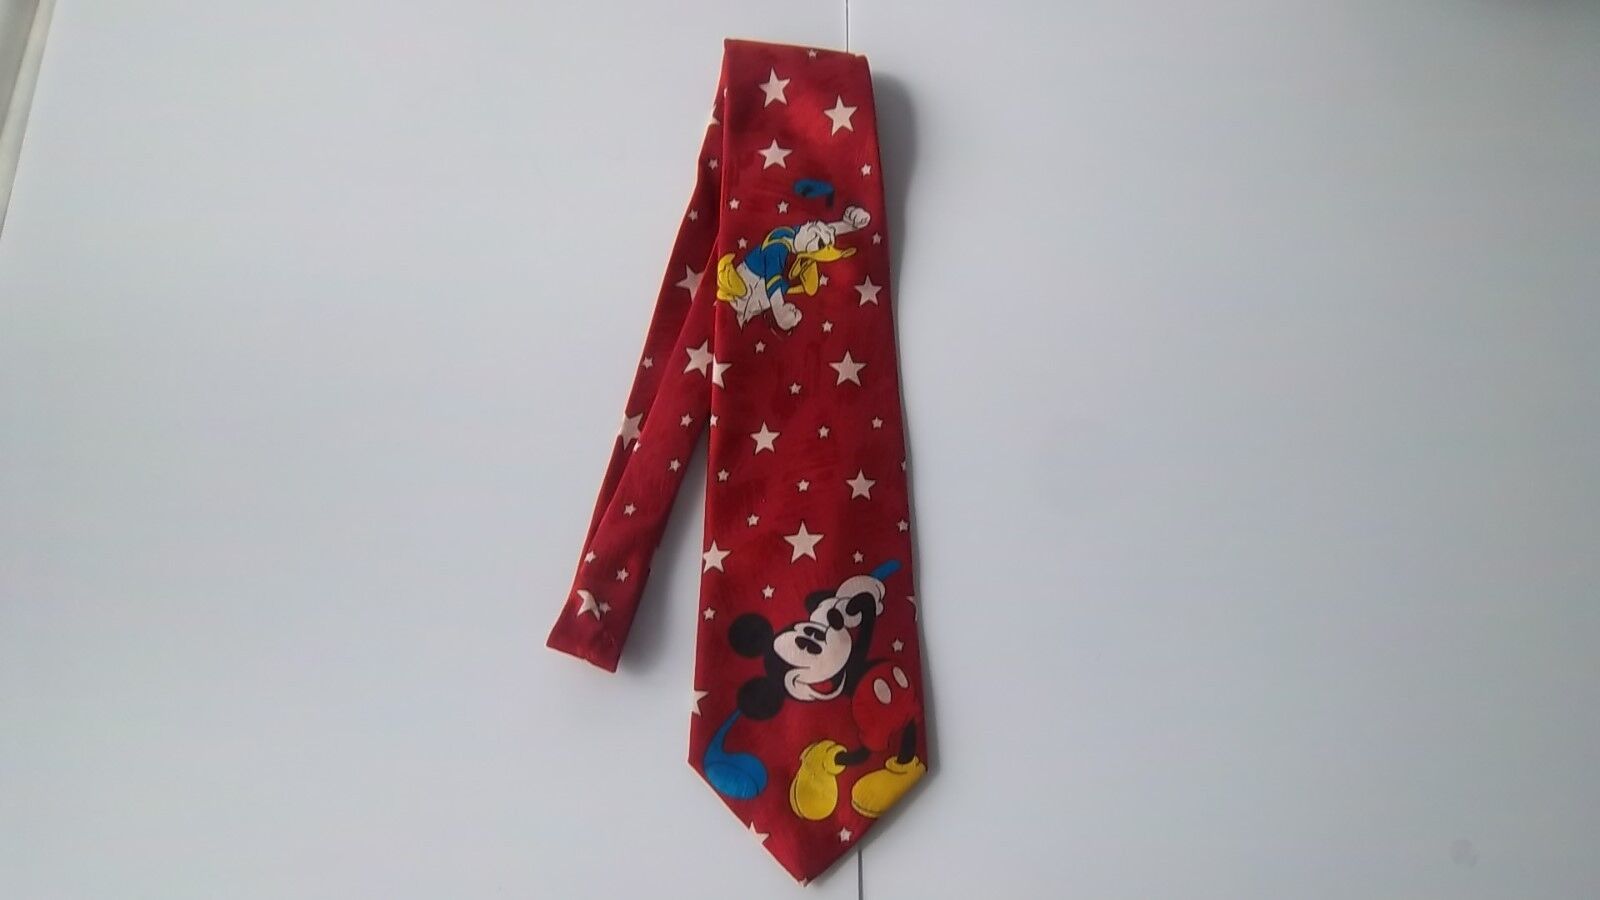 *~* DISNEY MICKEY MOUSE & DONALD DUCK PLAYING GOLF NECKTIE *~*